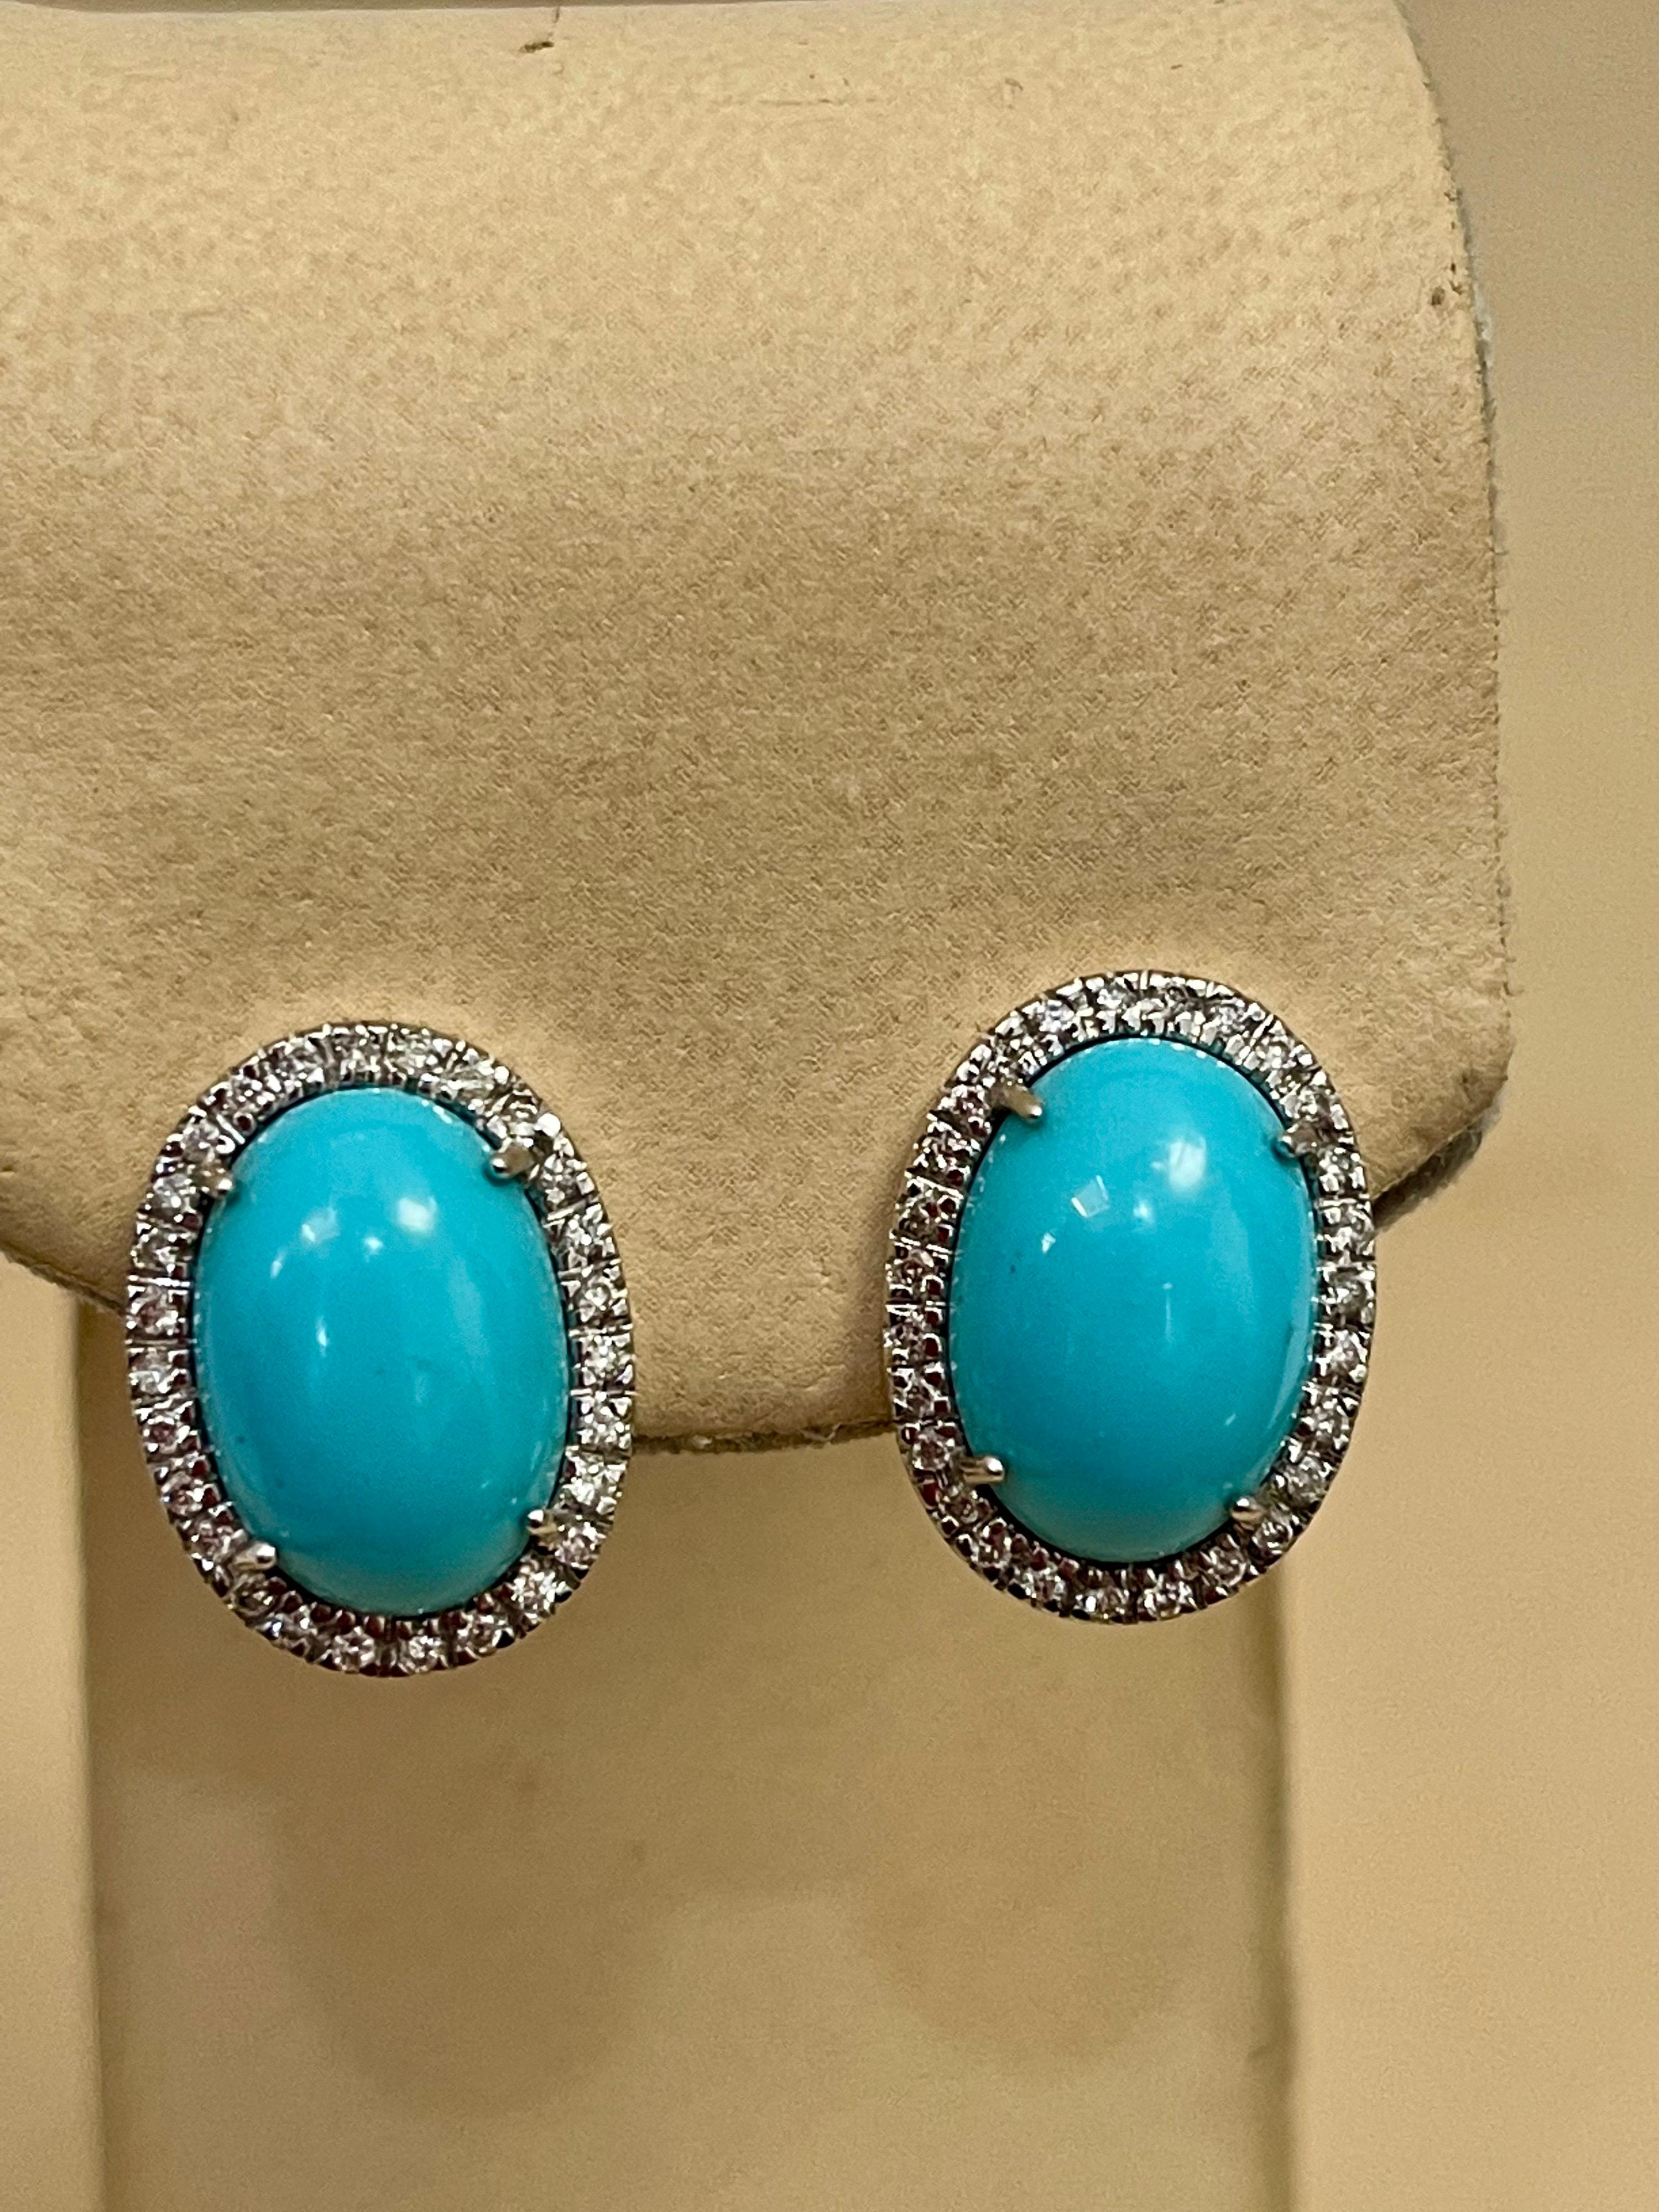 Cabochon Oval Turquoise and Diamond Stud Earring with Omega Back, 14 Karat White Gold For Sale